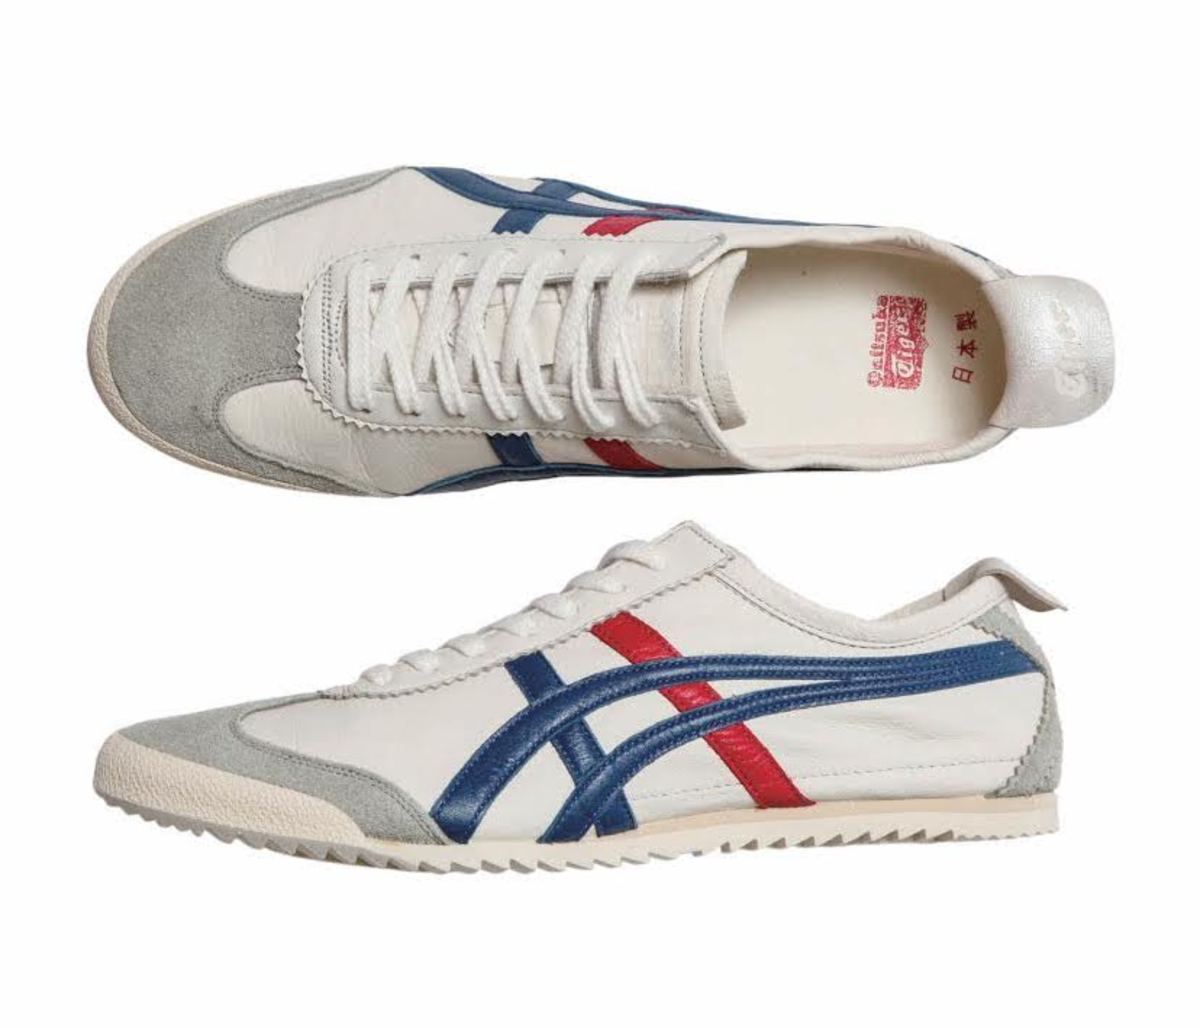 onitsuka tiger shoes made in japan